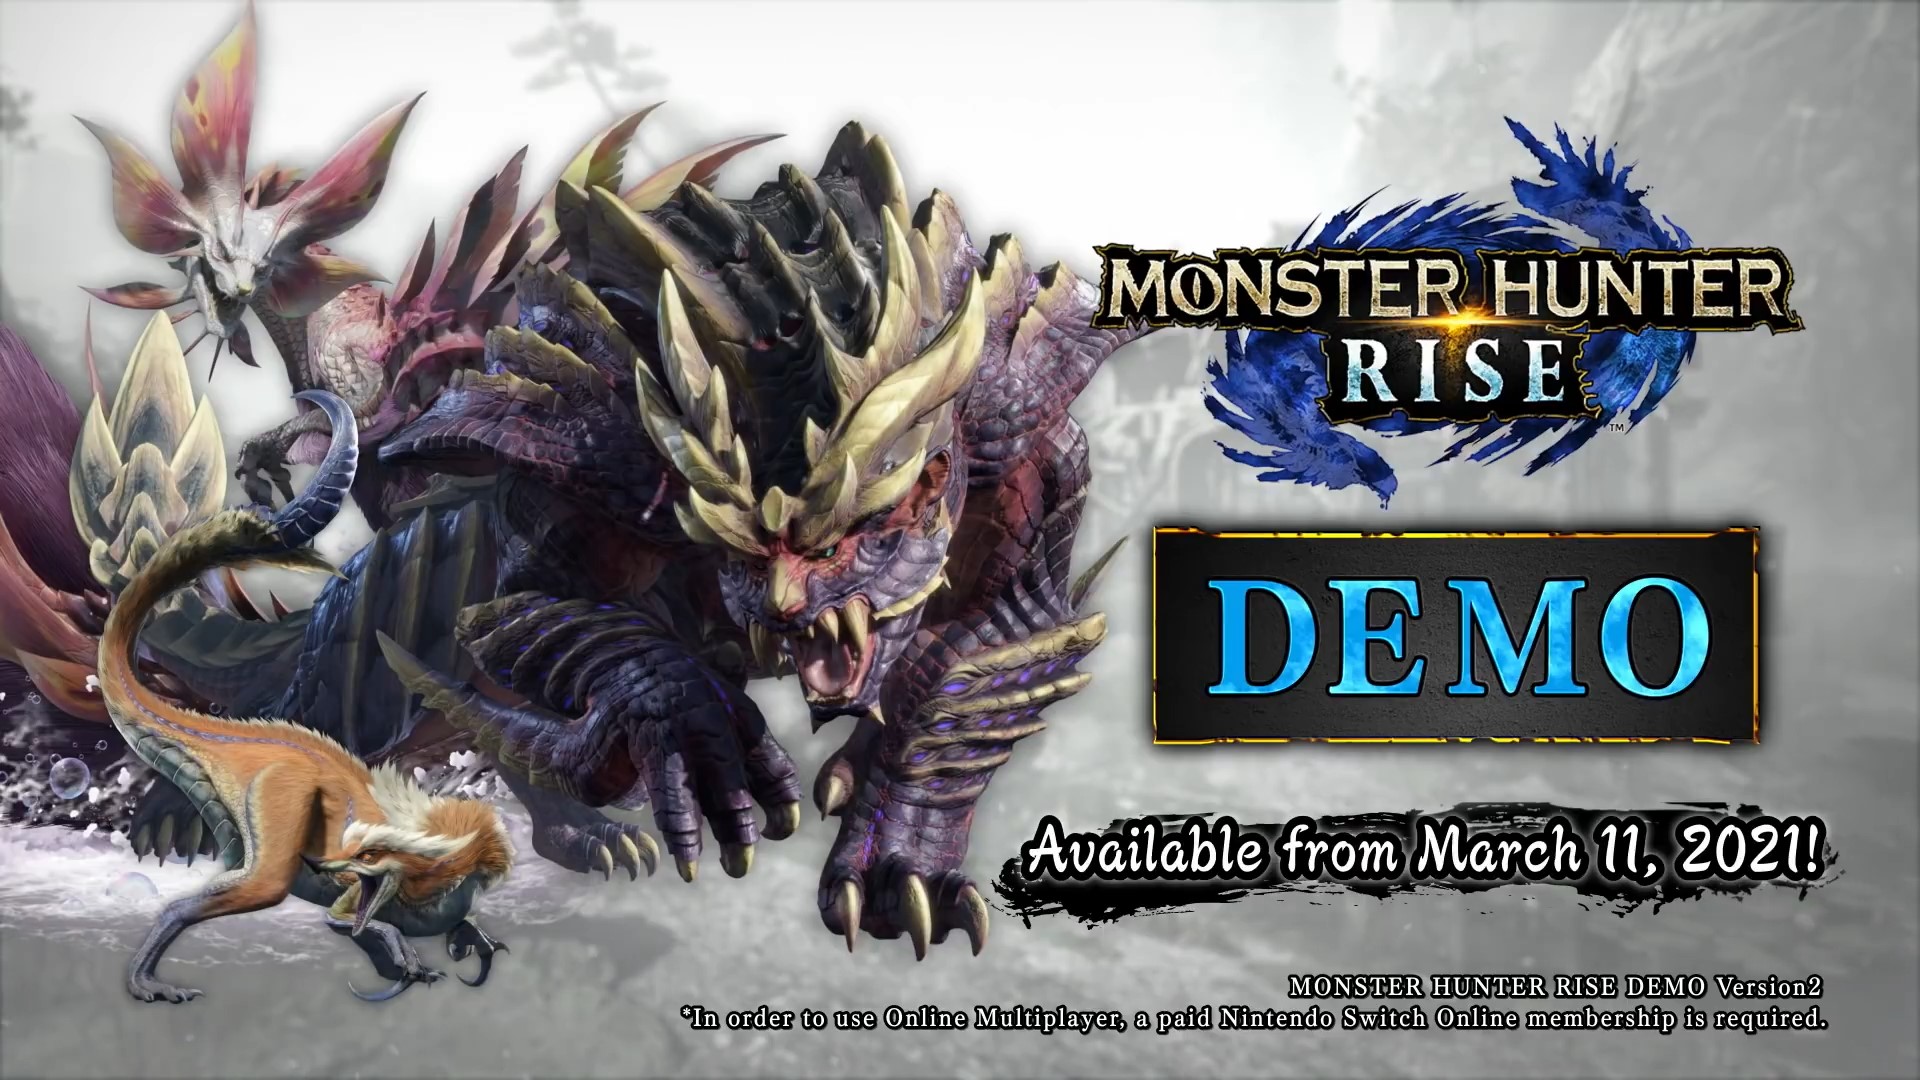 New Gameplay Details & Features Revealed For Monster Hunter Rise